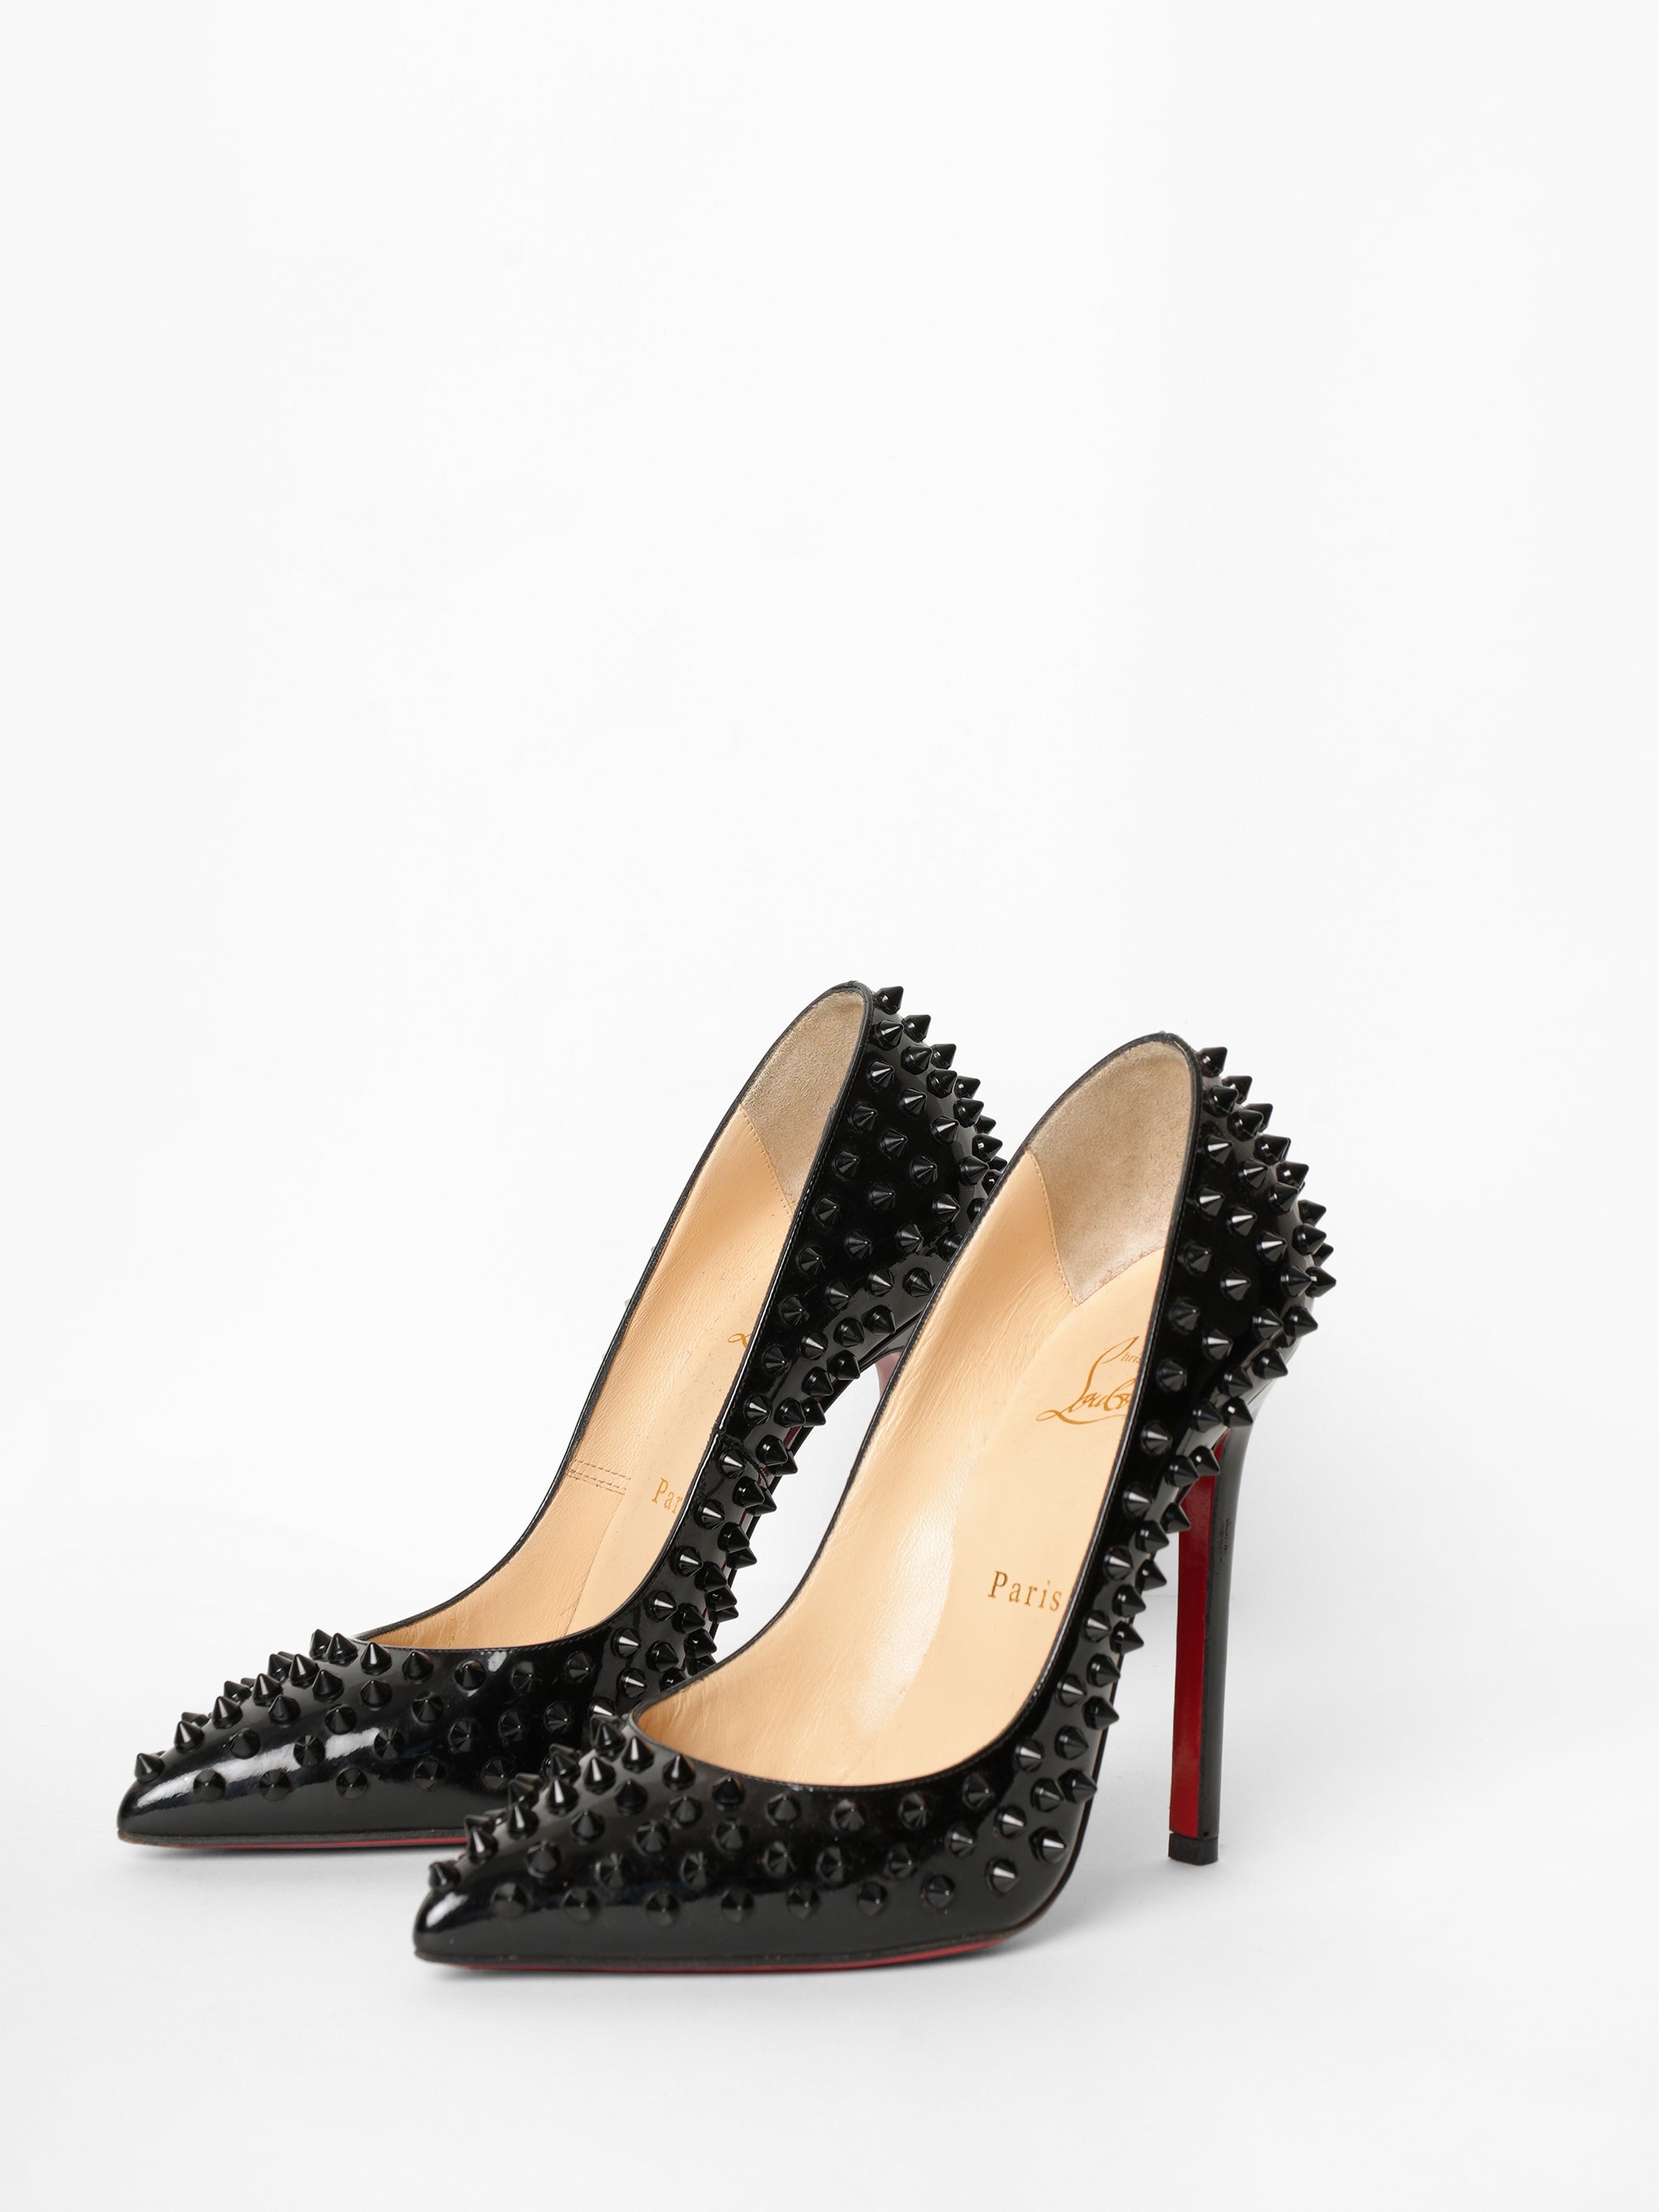 Christian Louboutin Pigalle Spike Pumps